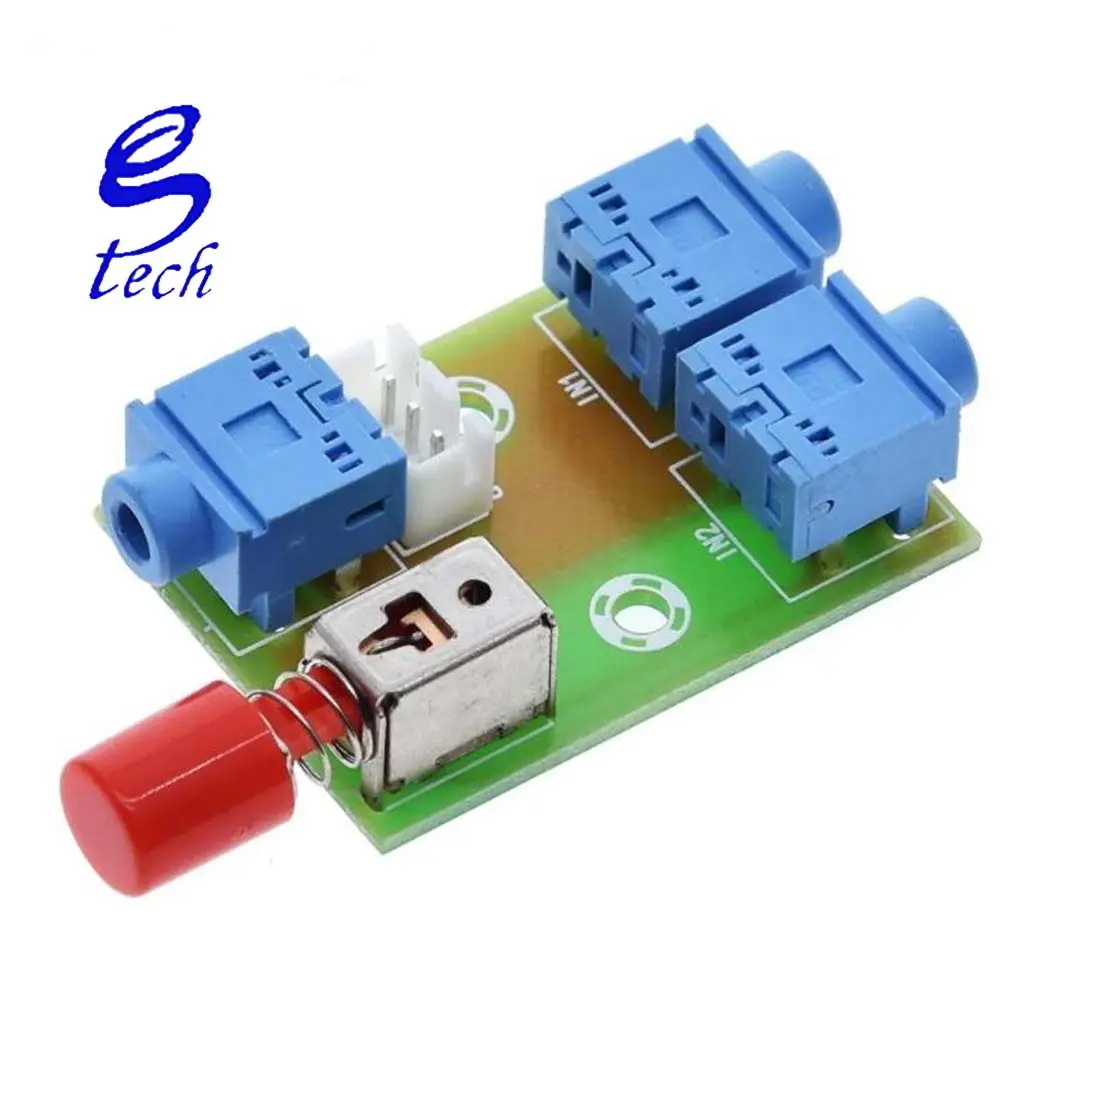 XH-M371 3.5 Audio 2 Ways into 1 Way Out Switching Module Board Audio Socket Switch Diy Electronic PCB Board